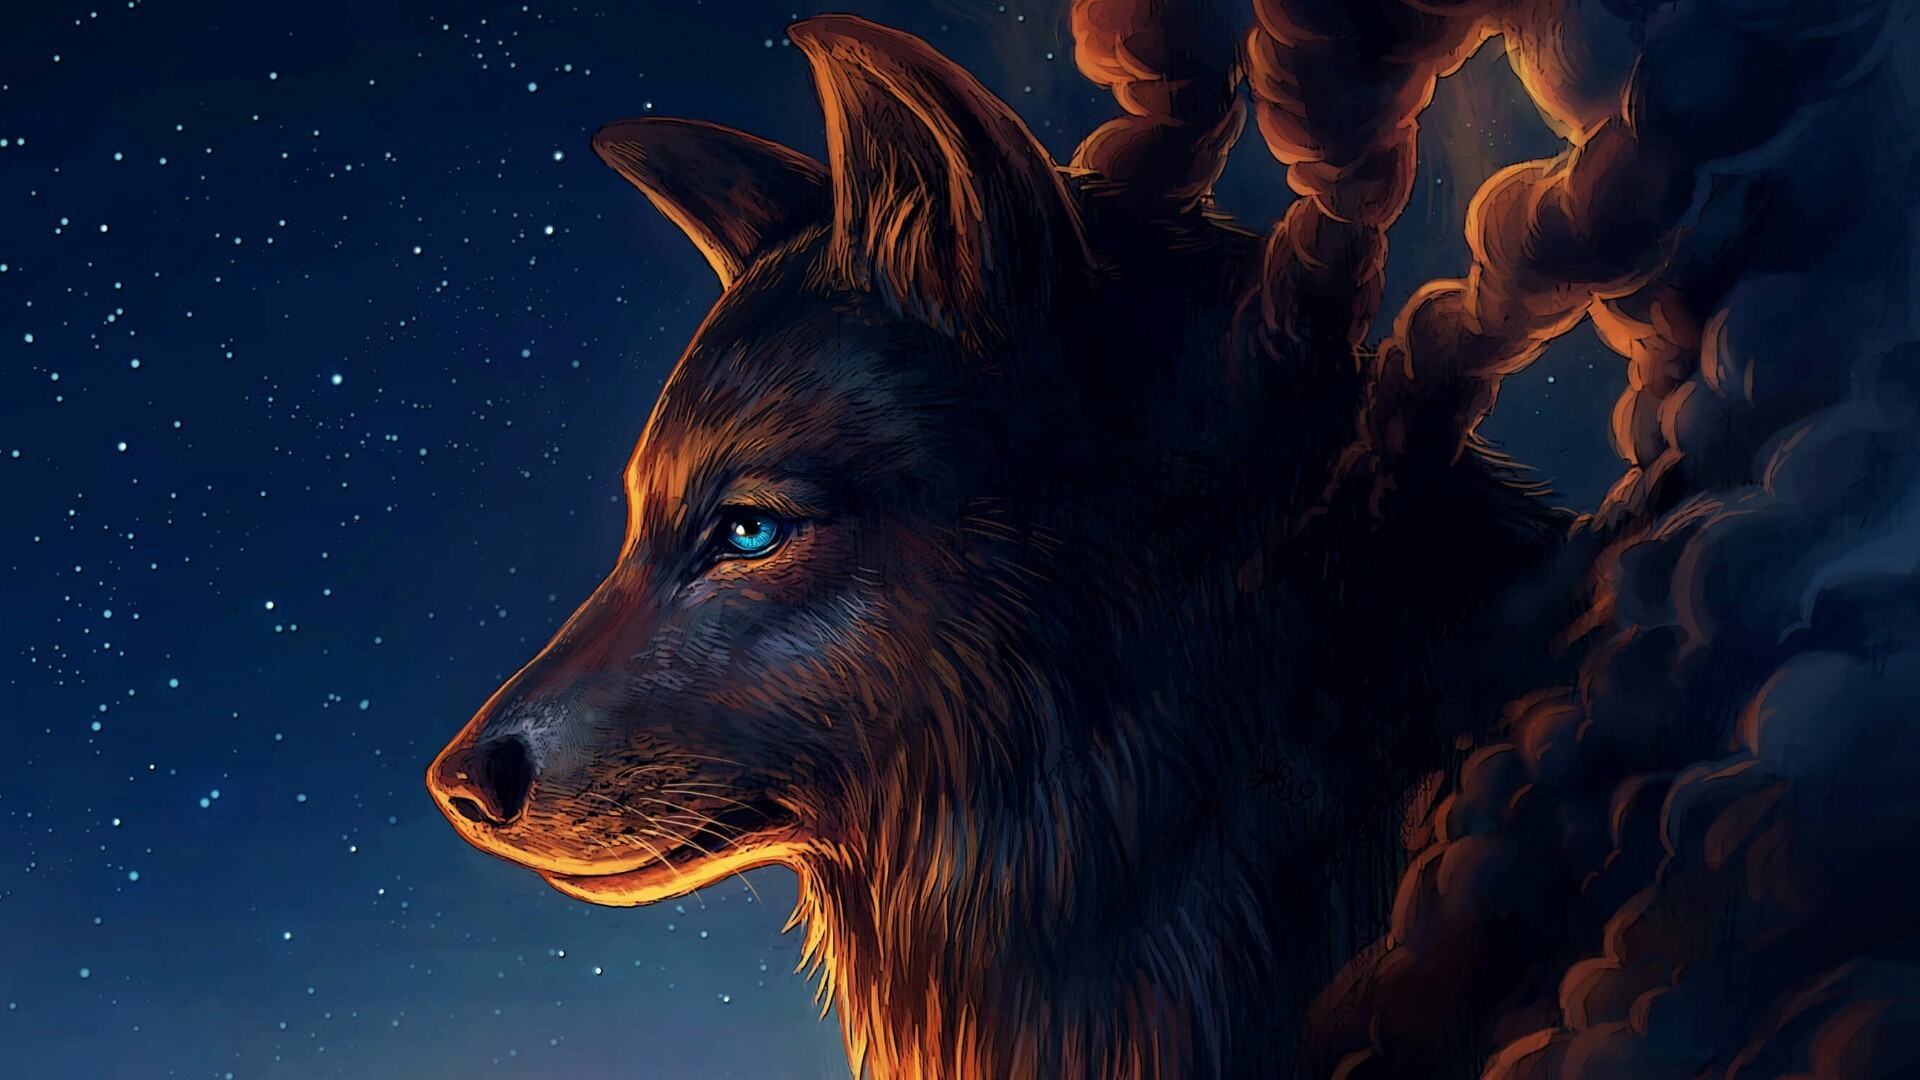 Wolf Wallpapers Hd Kolpaper Awesome Free Hd Wallpapers